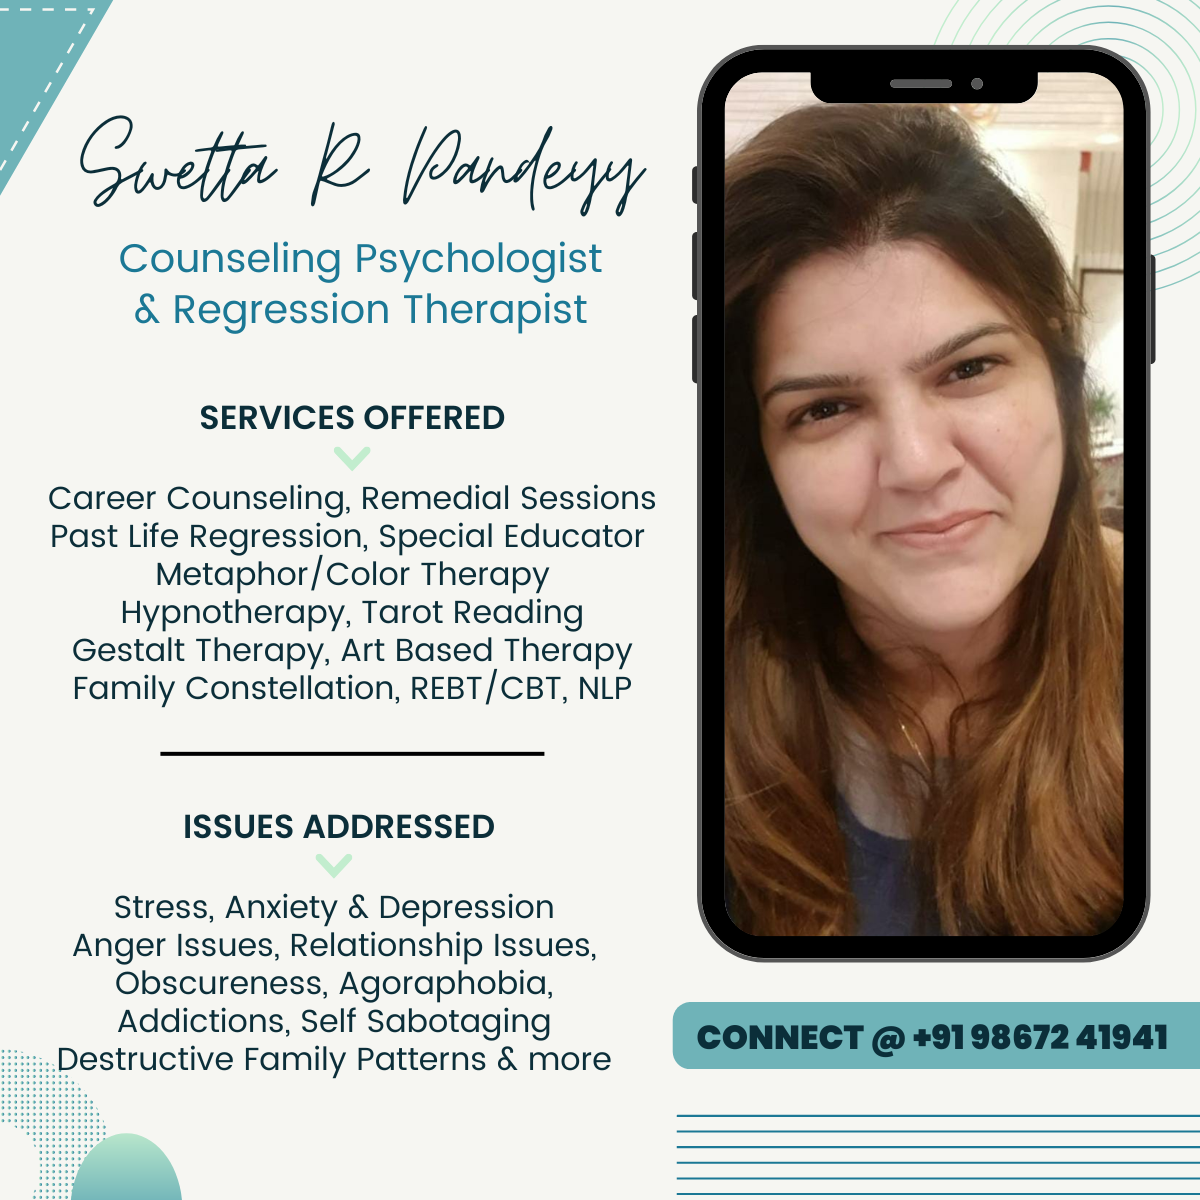 Sweta R Pandey - Counselling Psychologist & Regression Therapist- Hyderabad